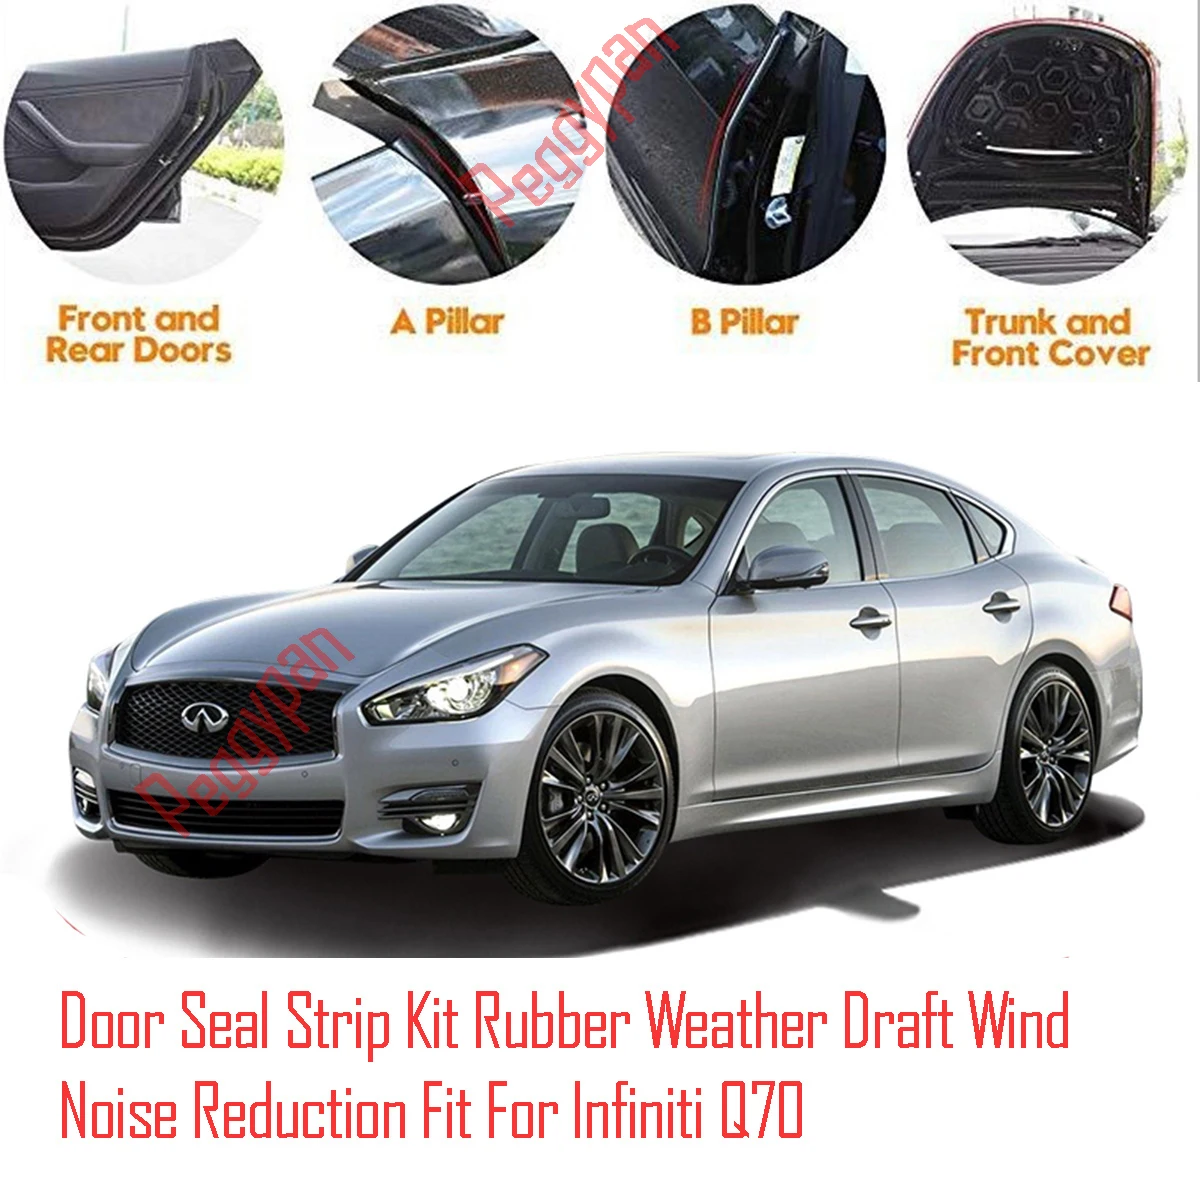 Door Seal Strip Kit Self Adhesive Window Engine Cover Soundproof Rubber Weather Draft Wind Noise Reduction Fit For Infiniti Q70